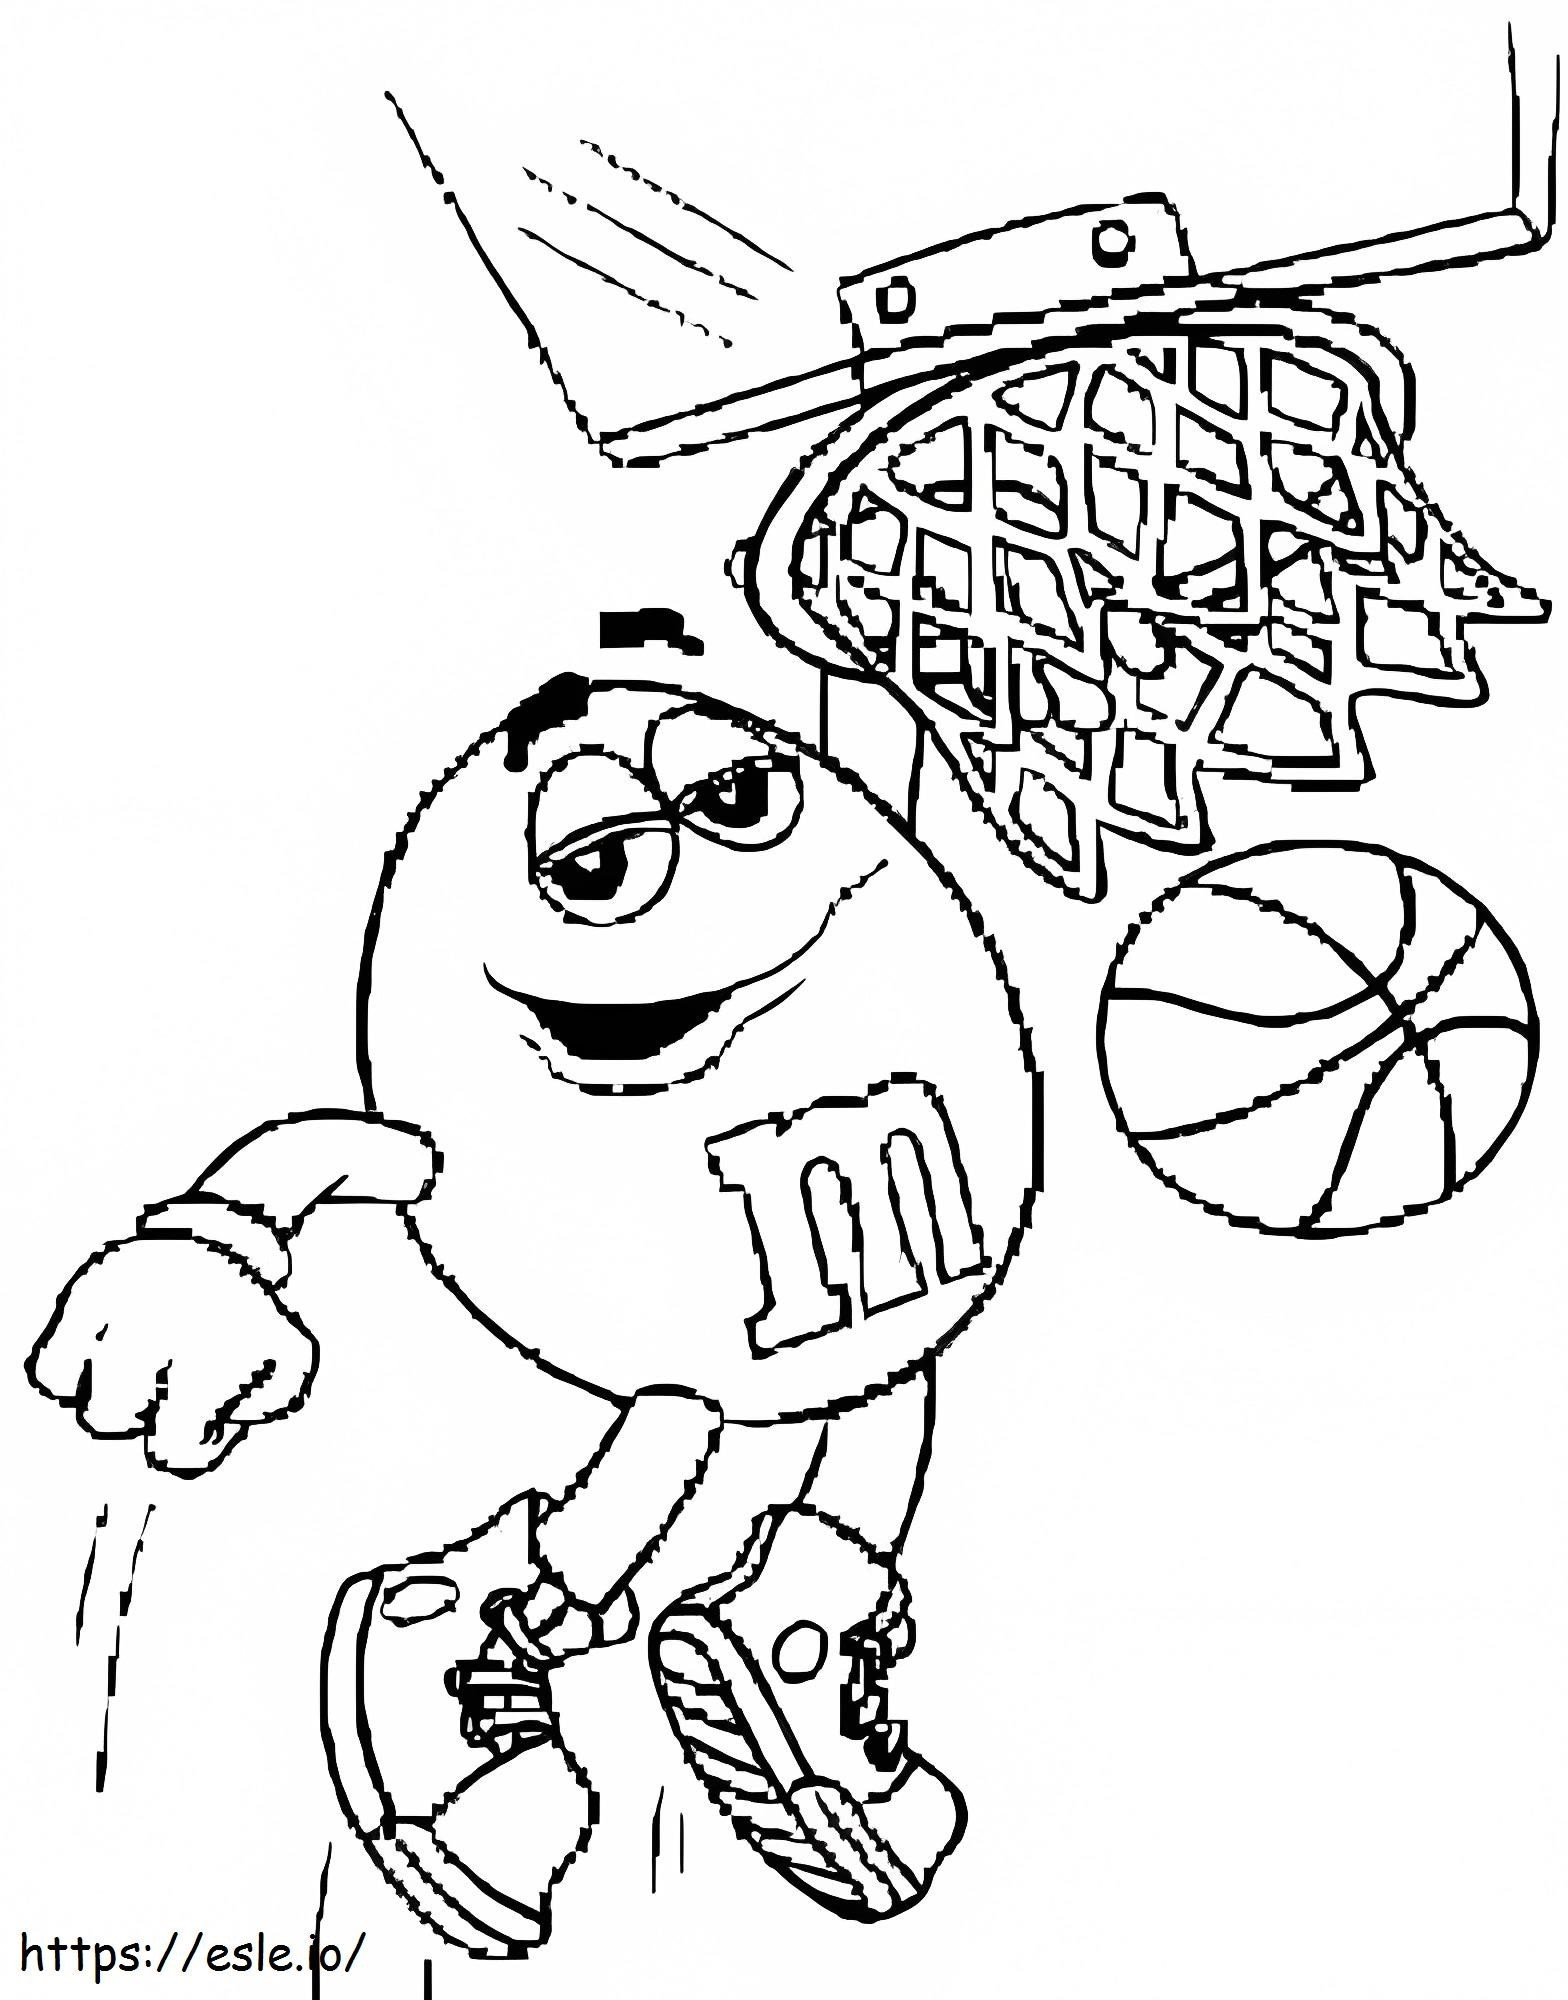 Mm Playing Basketball coloring page